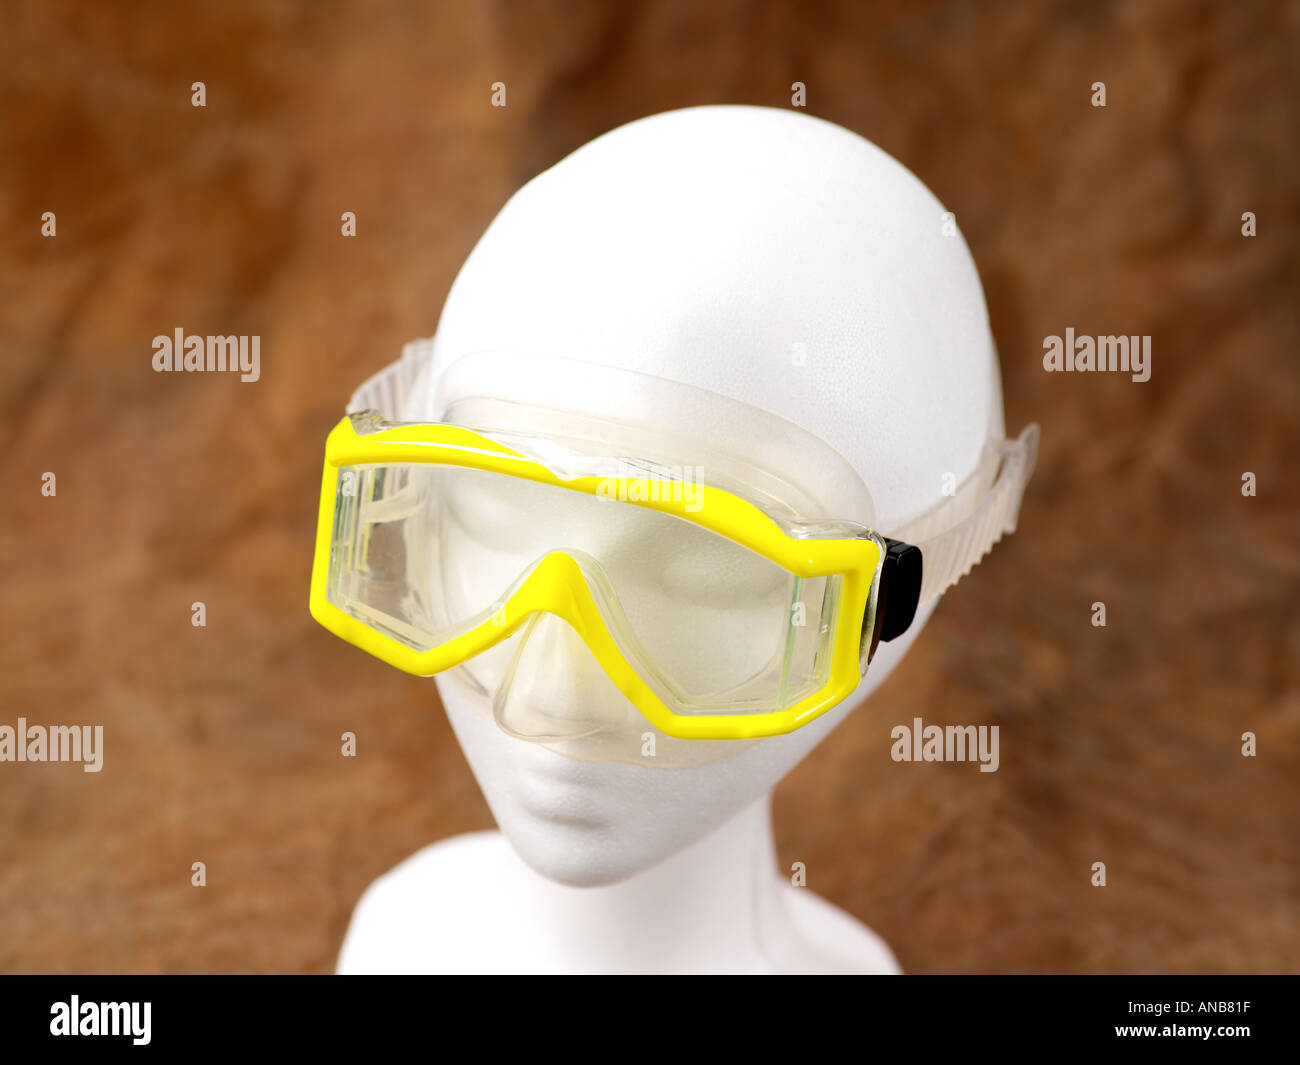 Scuba diving and snorkeling face mask on female head form Stock Photo